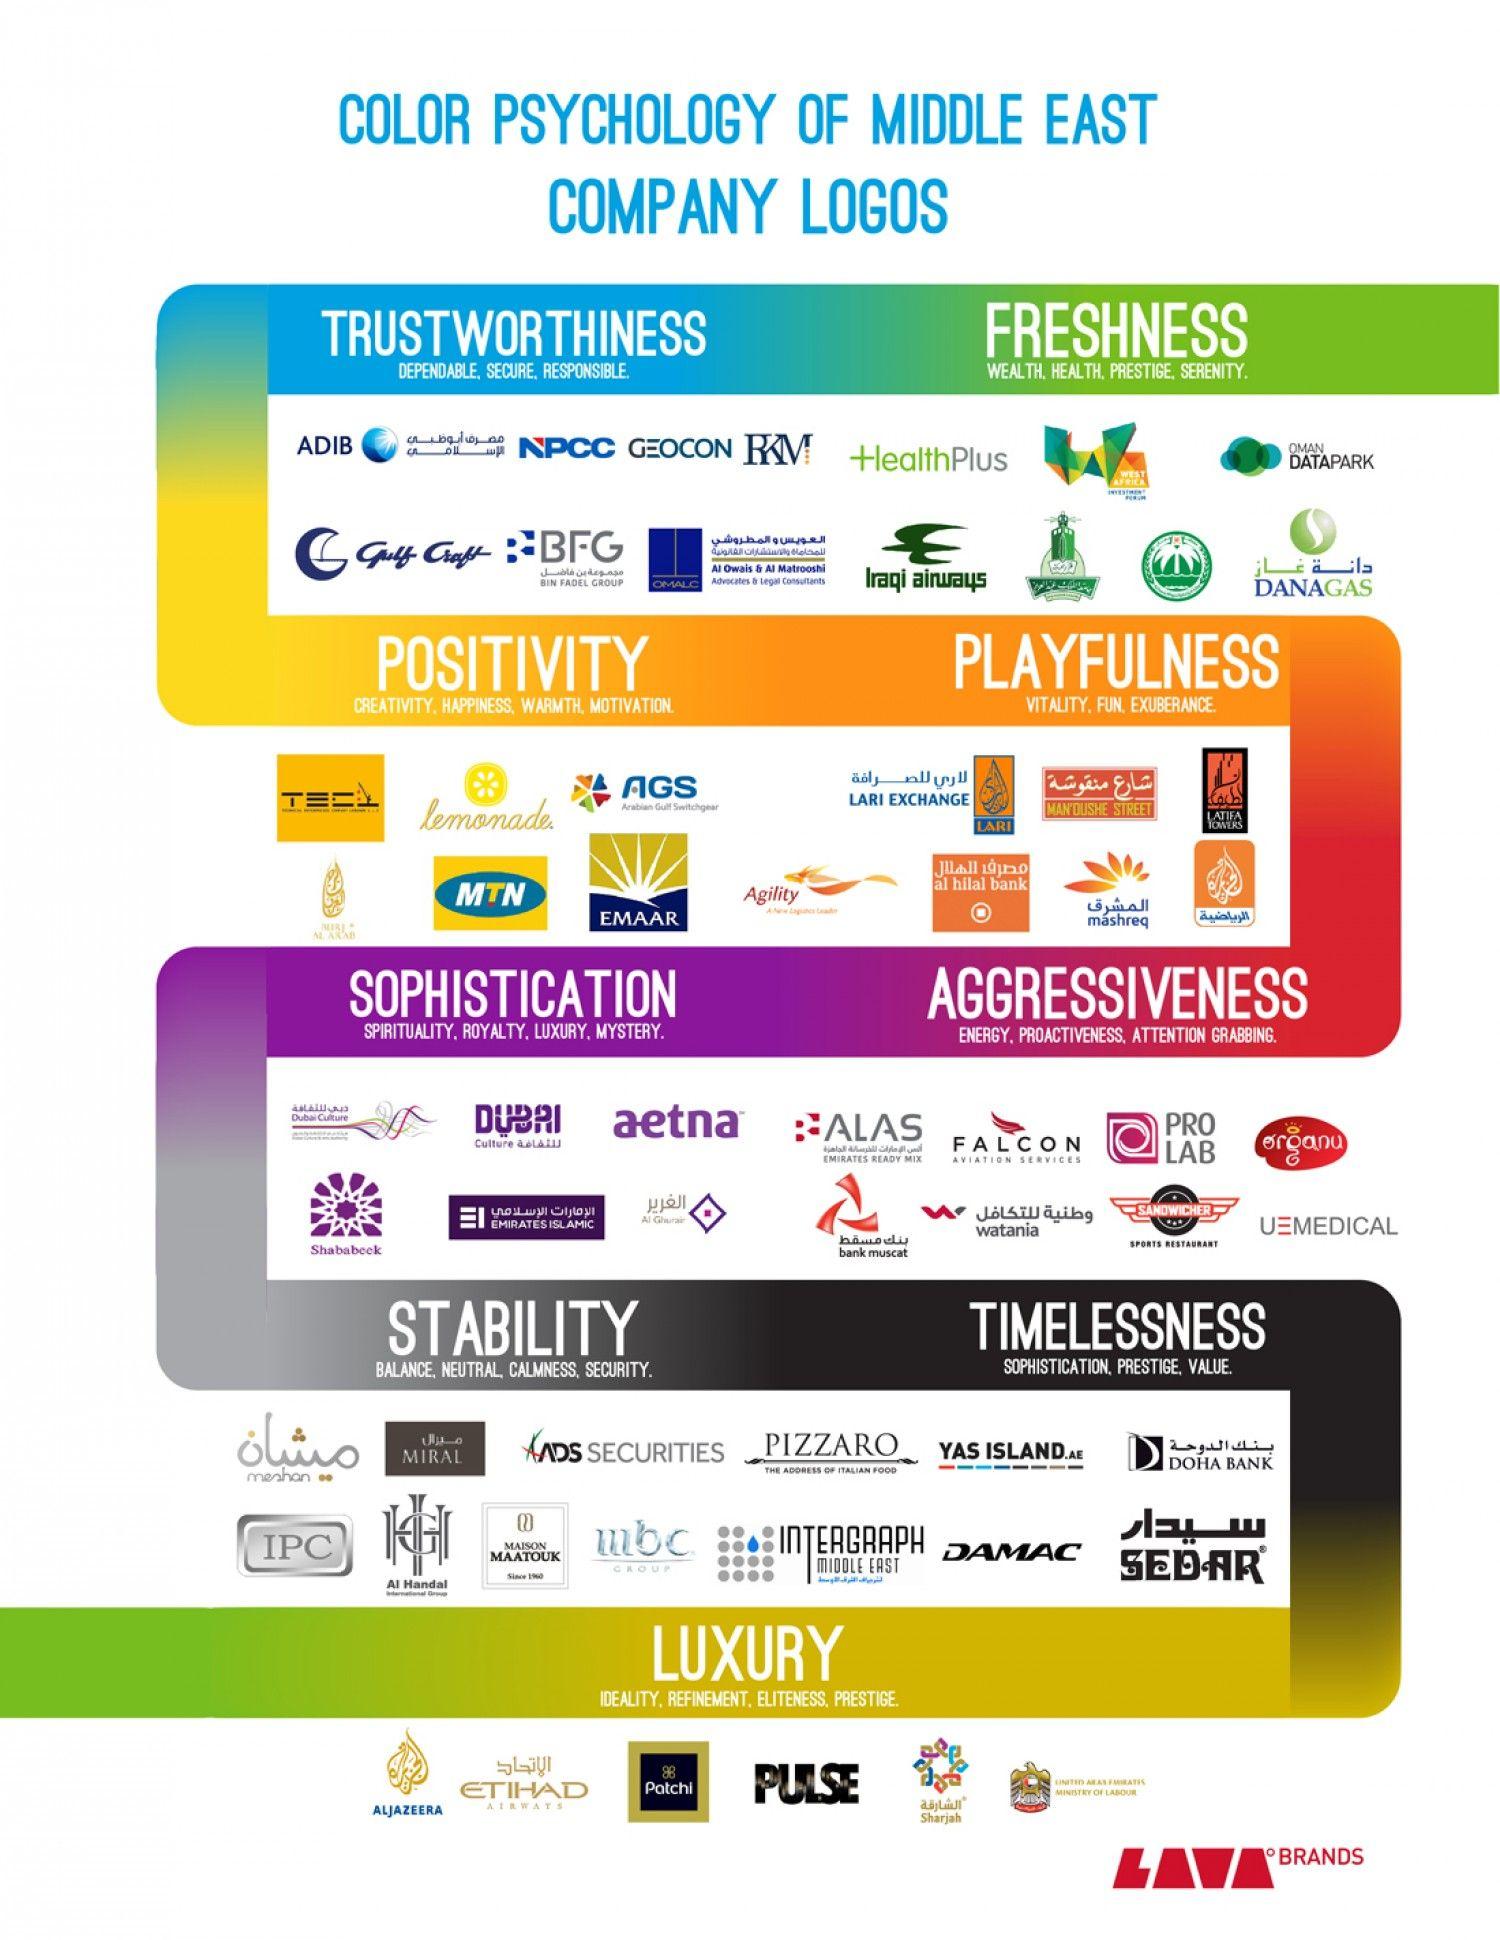 Purple and Organge Company Logo - COLOR PSYCHOLOGY OF MIDDLE EAST COMPANY LOGOS [Infographic]